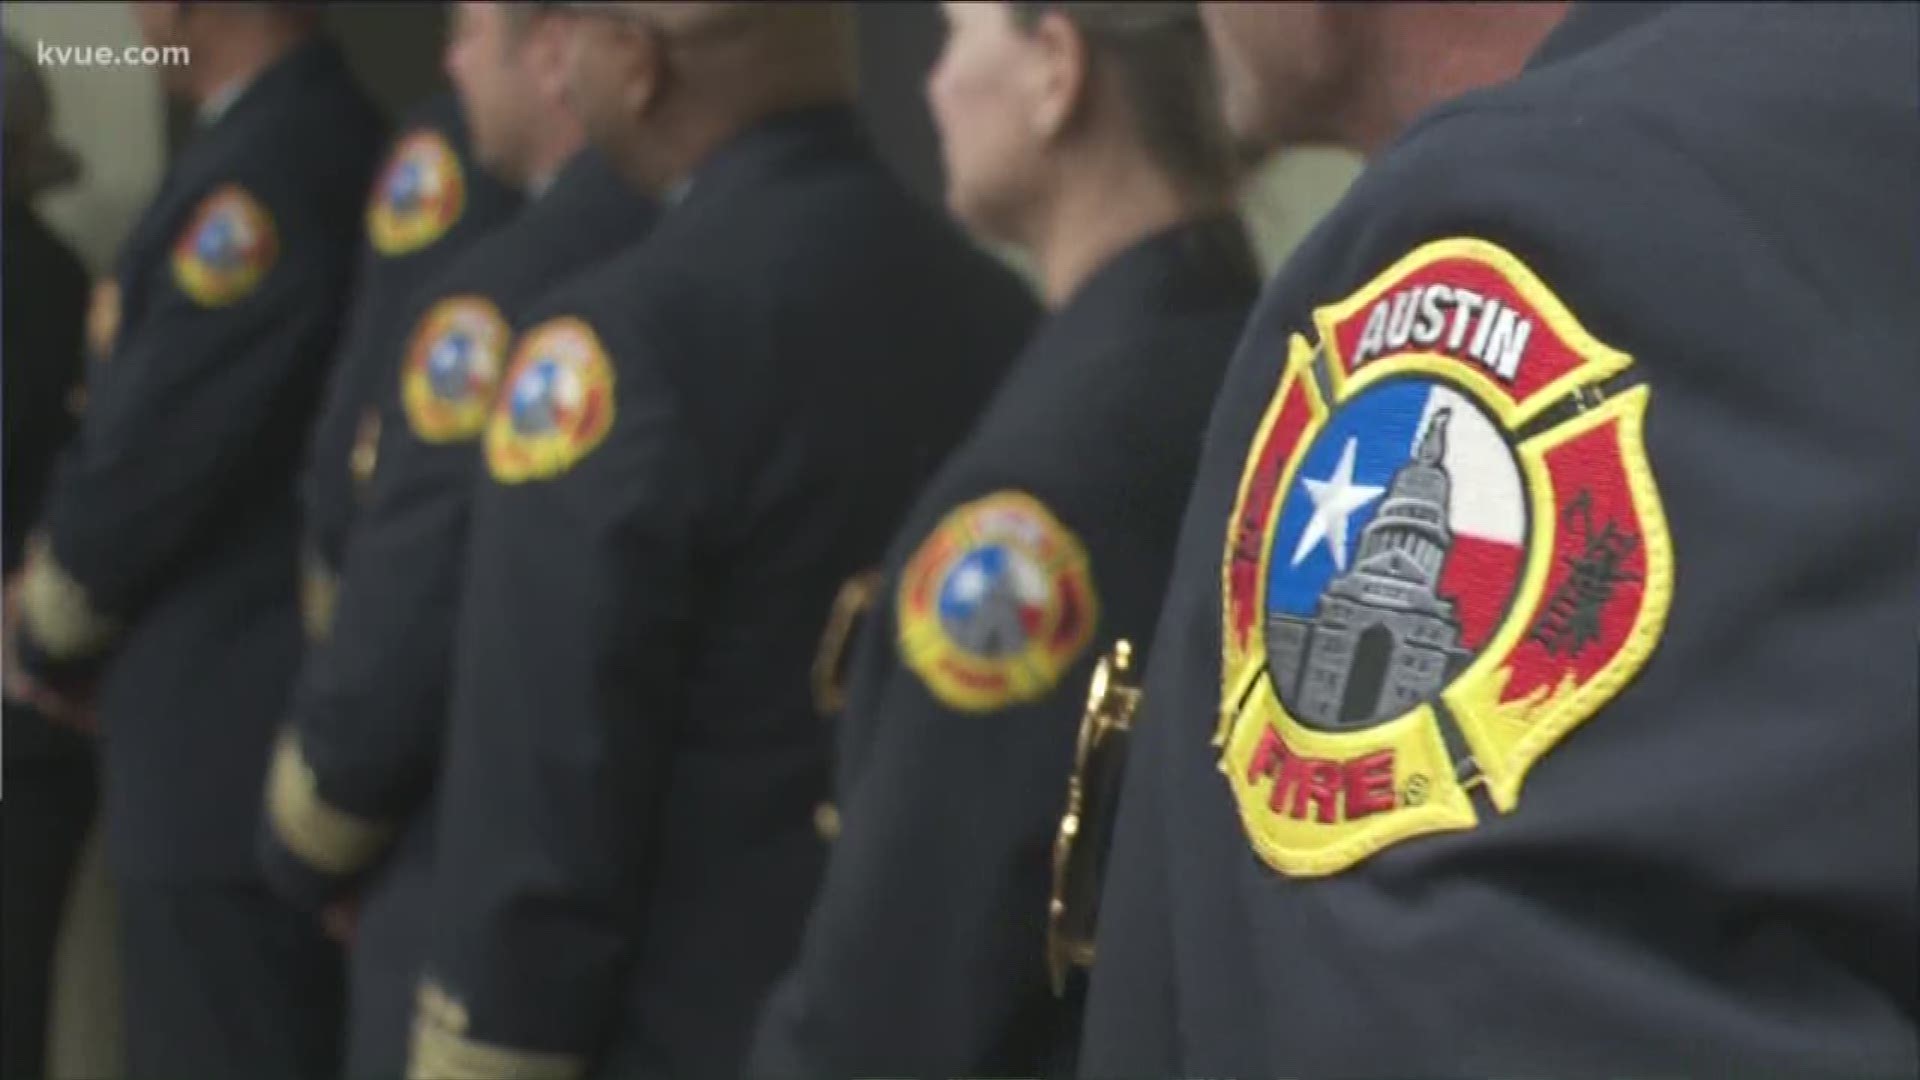 On Monday, the Austin Fire Department honored two brave people for their heroism.